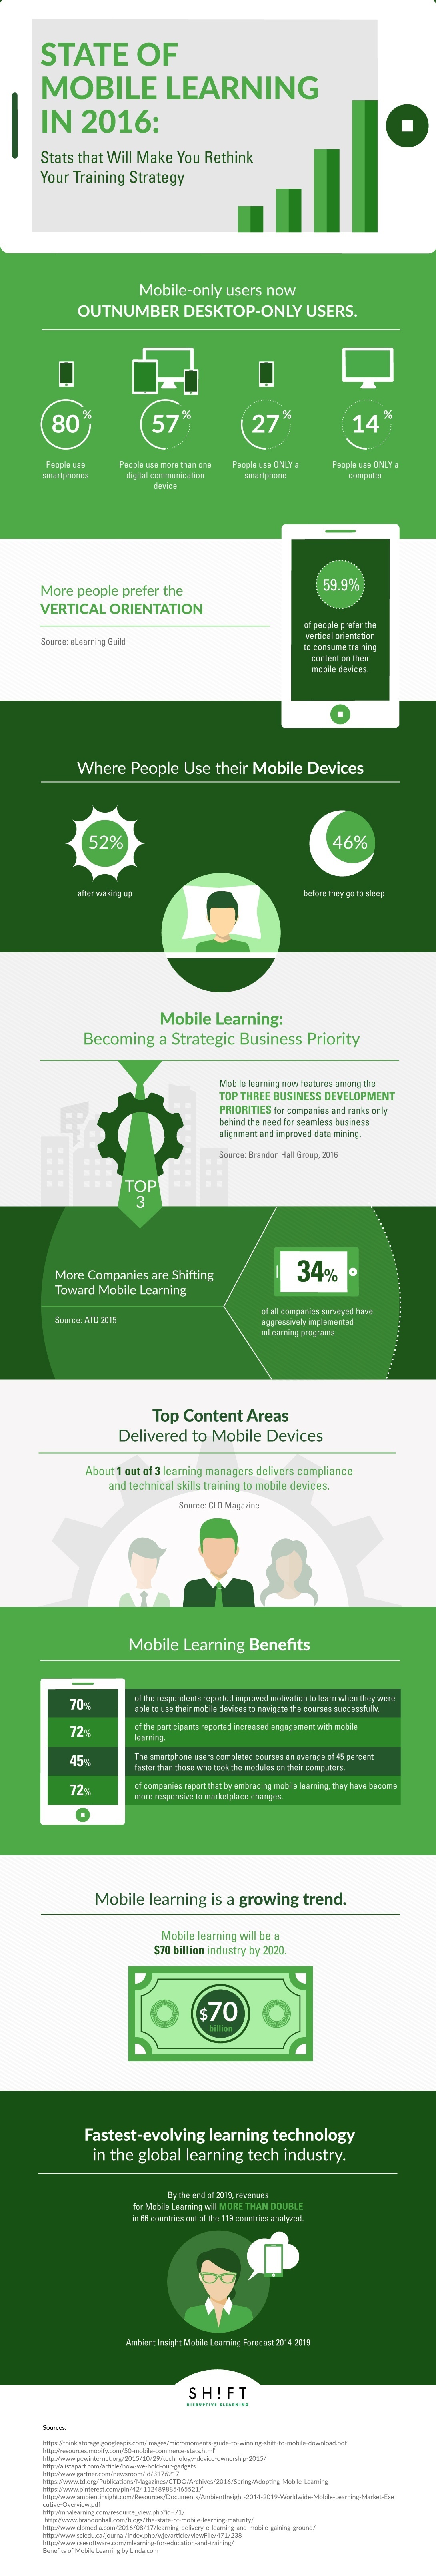 State of Mobile Learning in 2016 Infographic